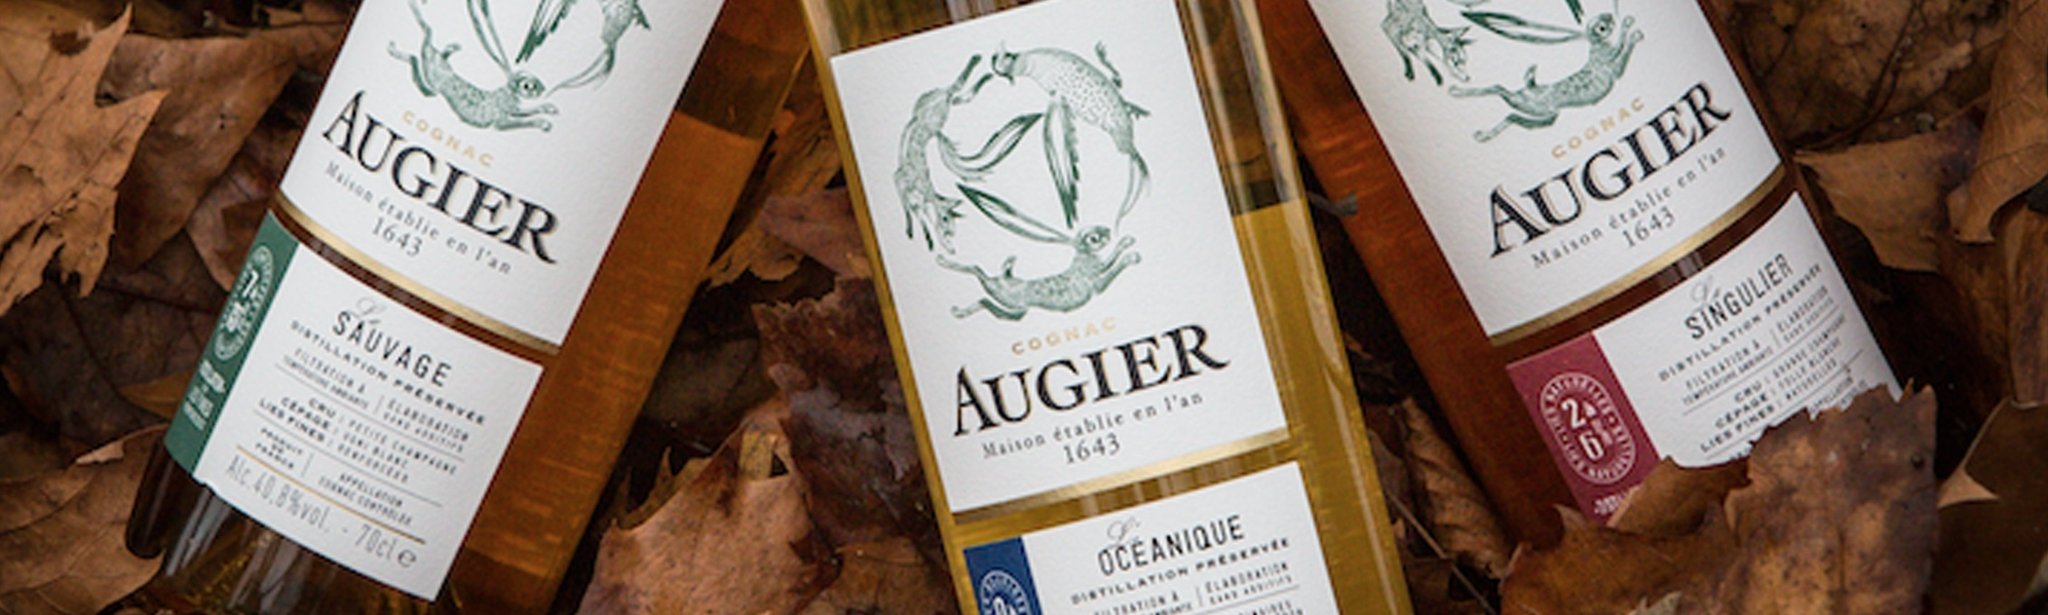 Augier - The Bottle Club